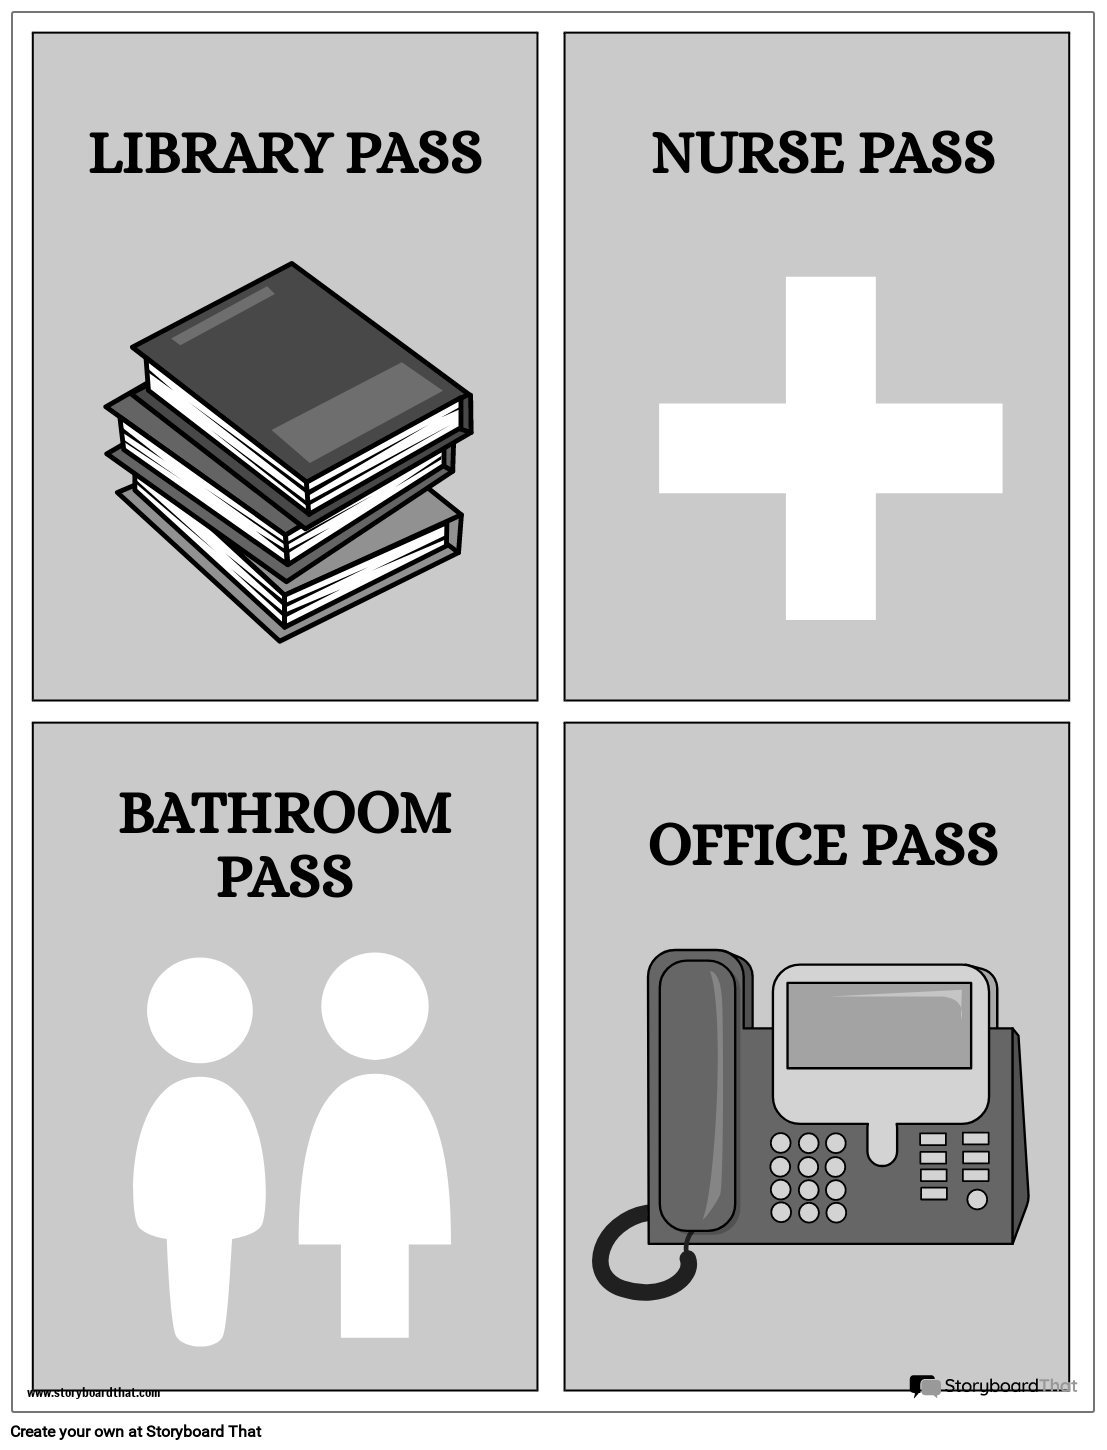 hall-pass-with-icons-in-black-and-white-storyboard